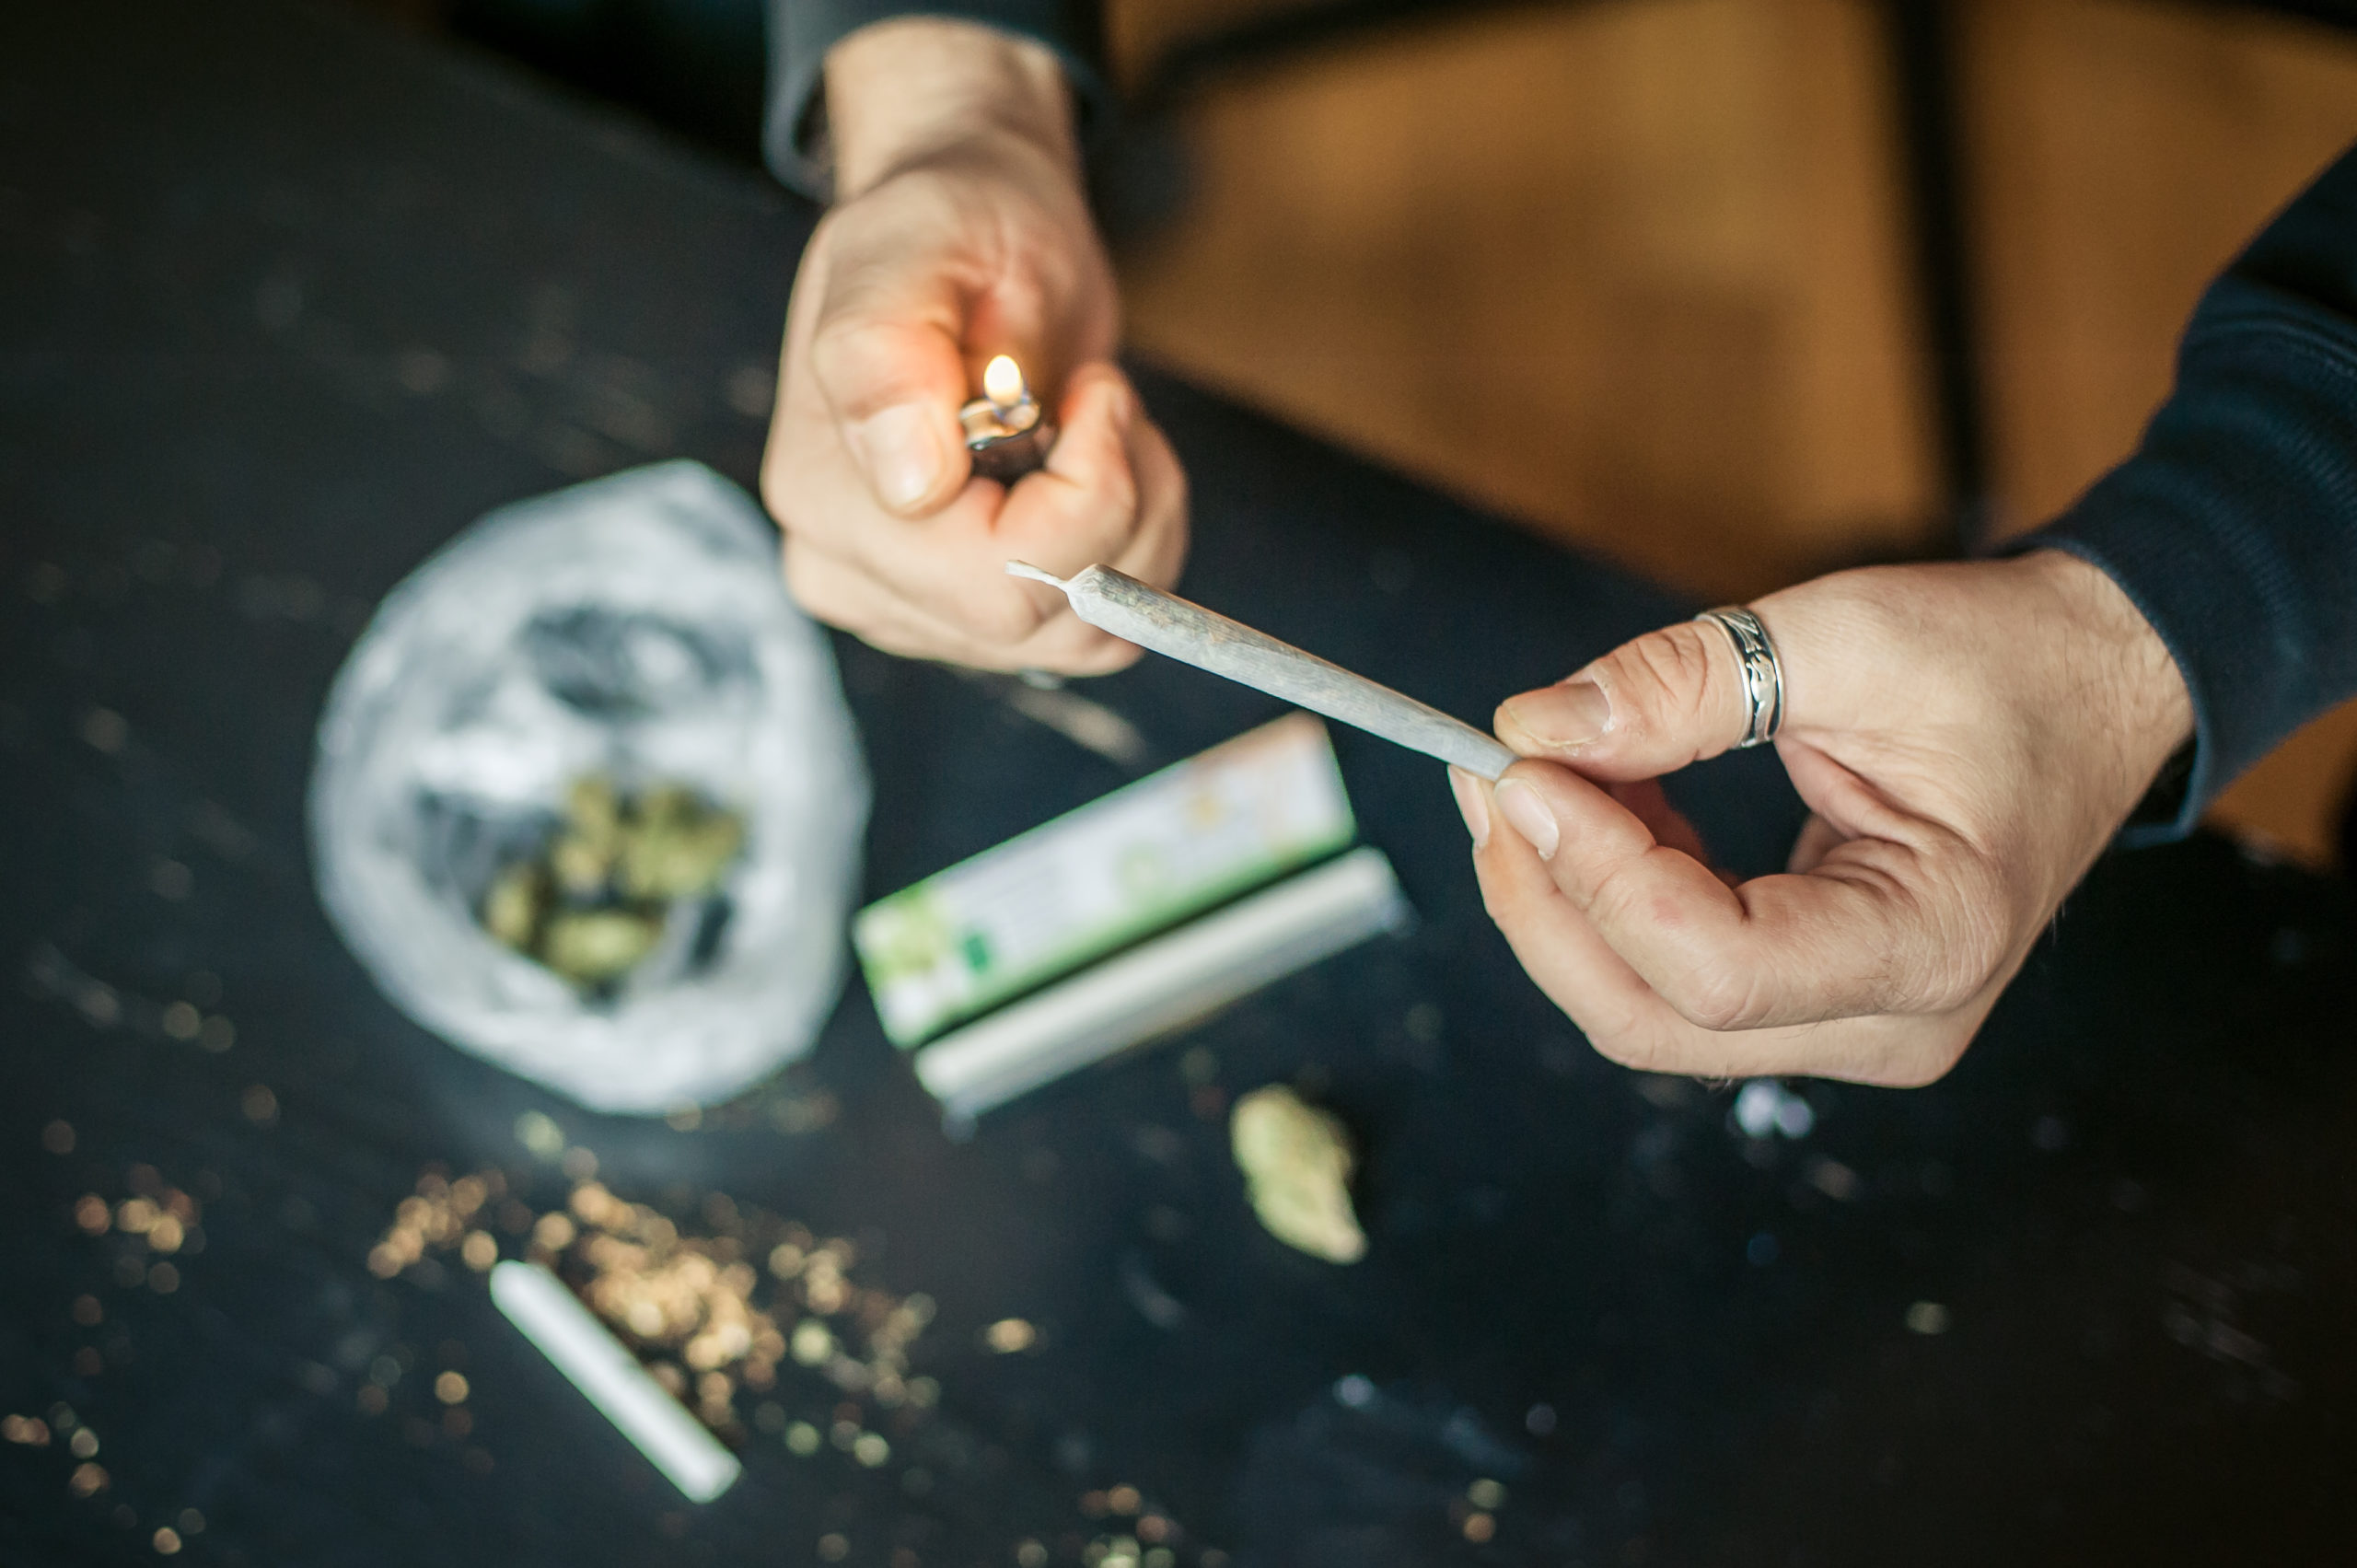 A man holds a lit lighter up near the end of a cannabis joint.